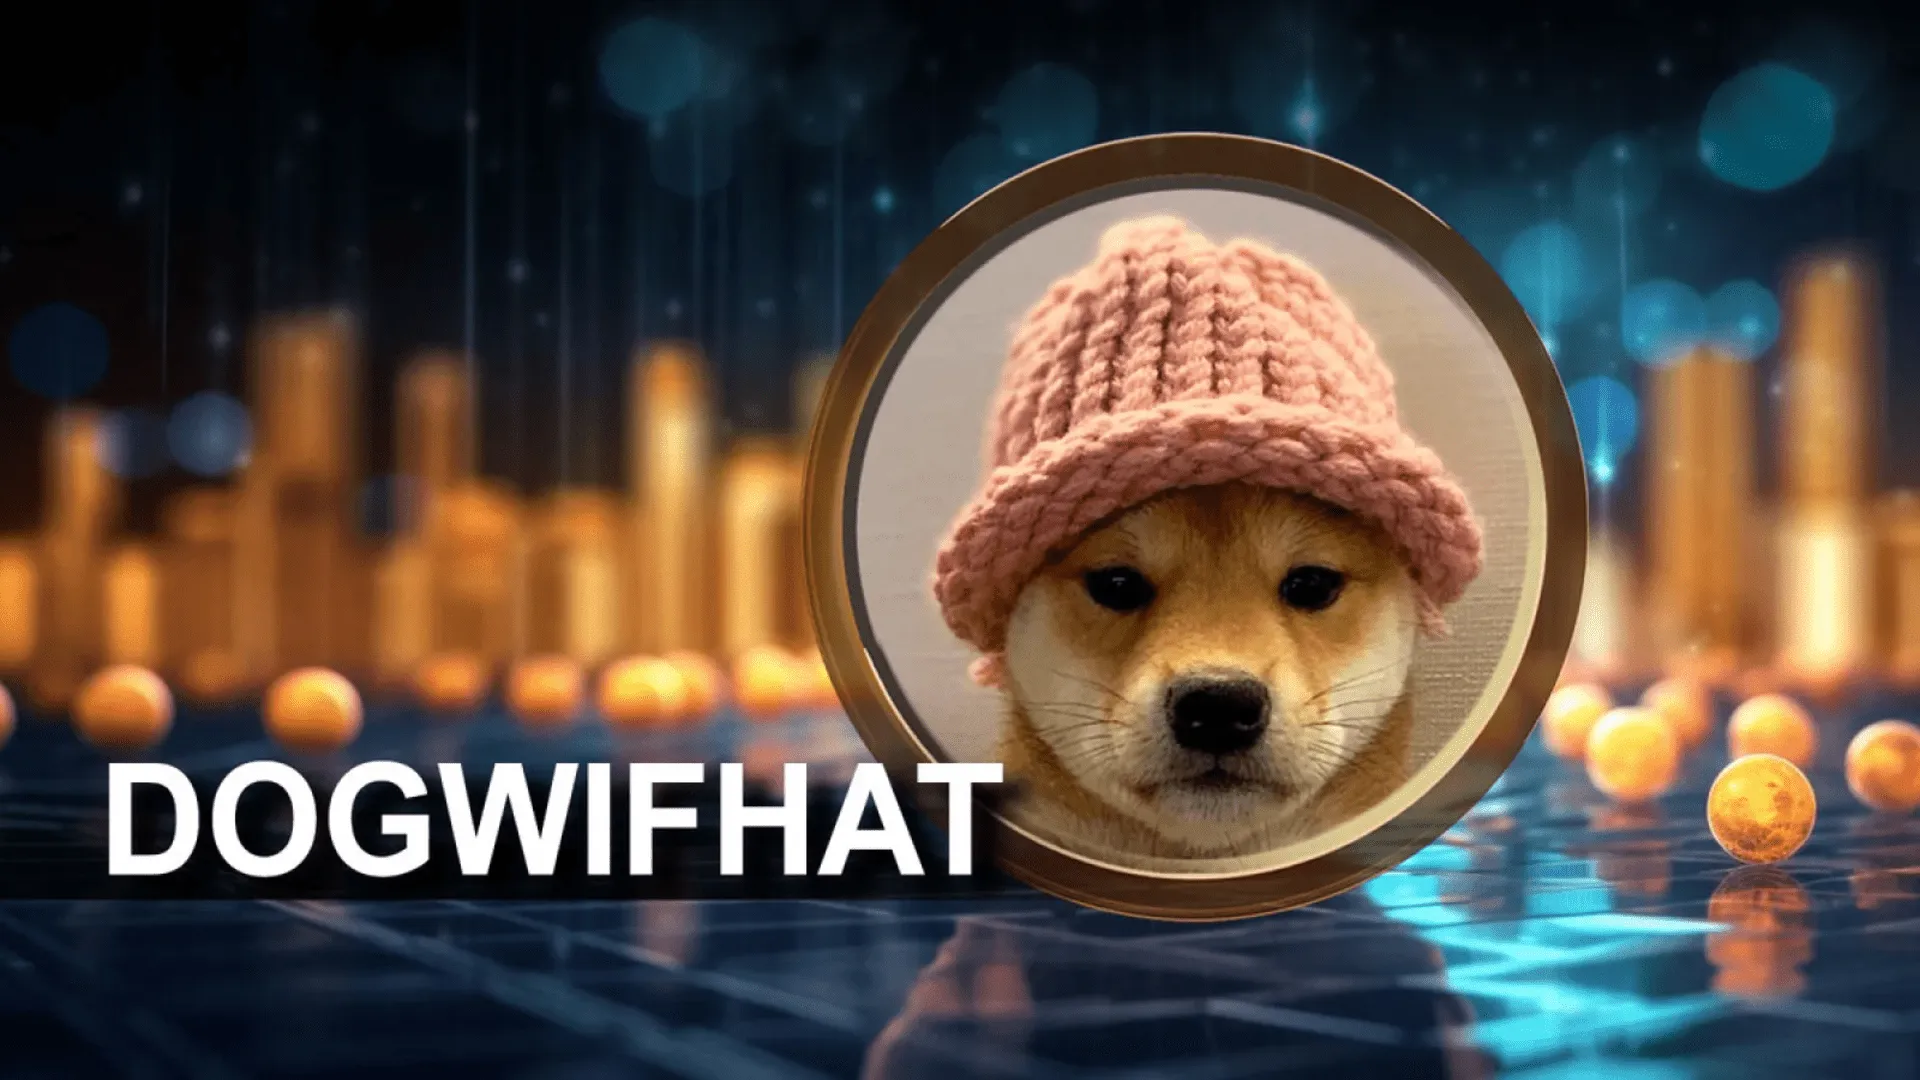 Why are Dogwifhat and DOGE Investors Investing in Cute New Crypto Koala Coin?